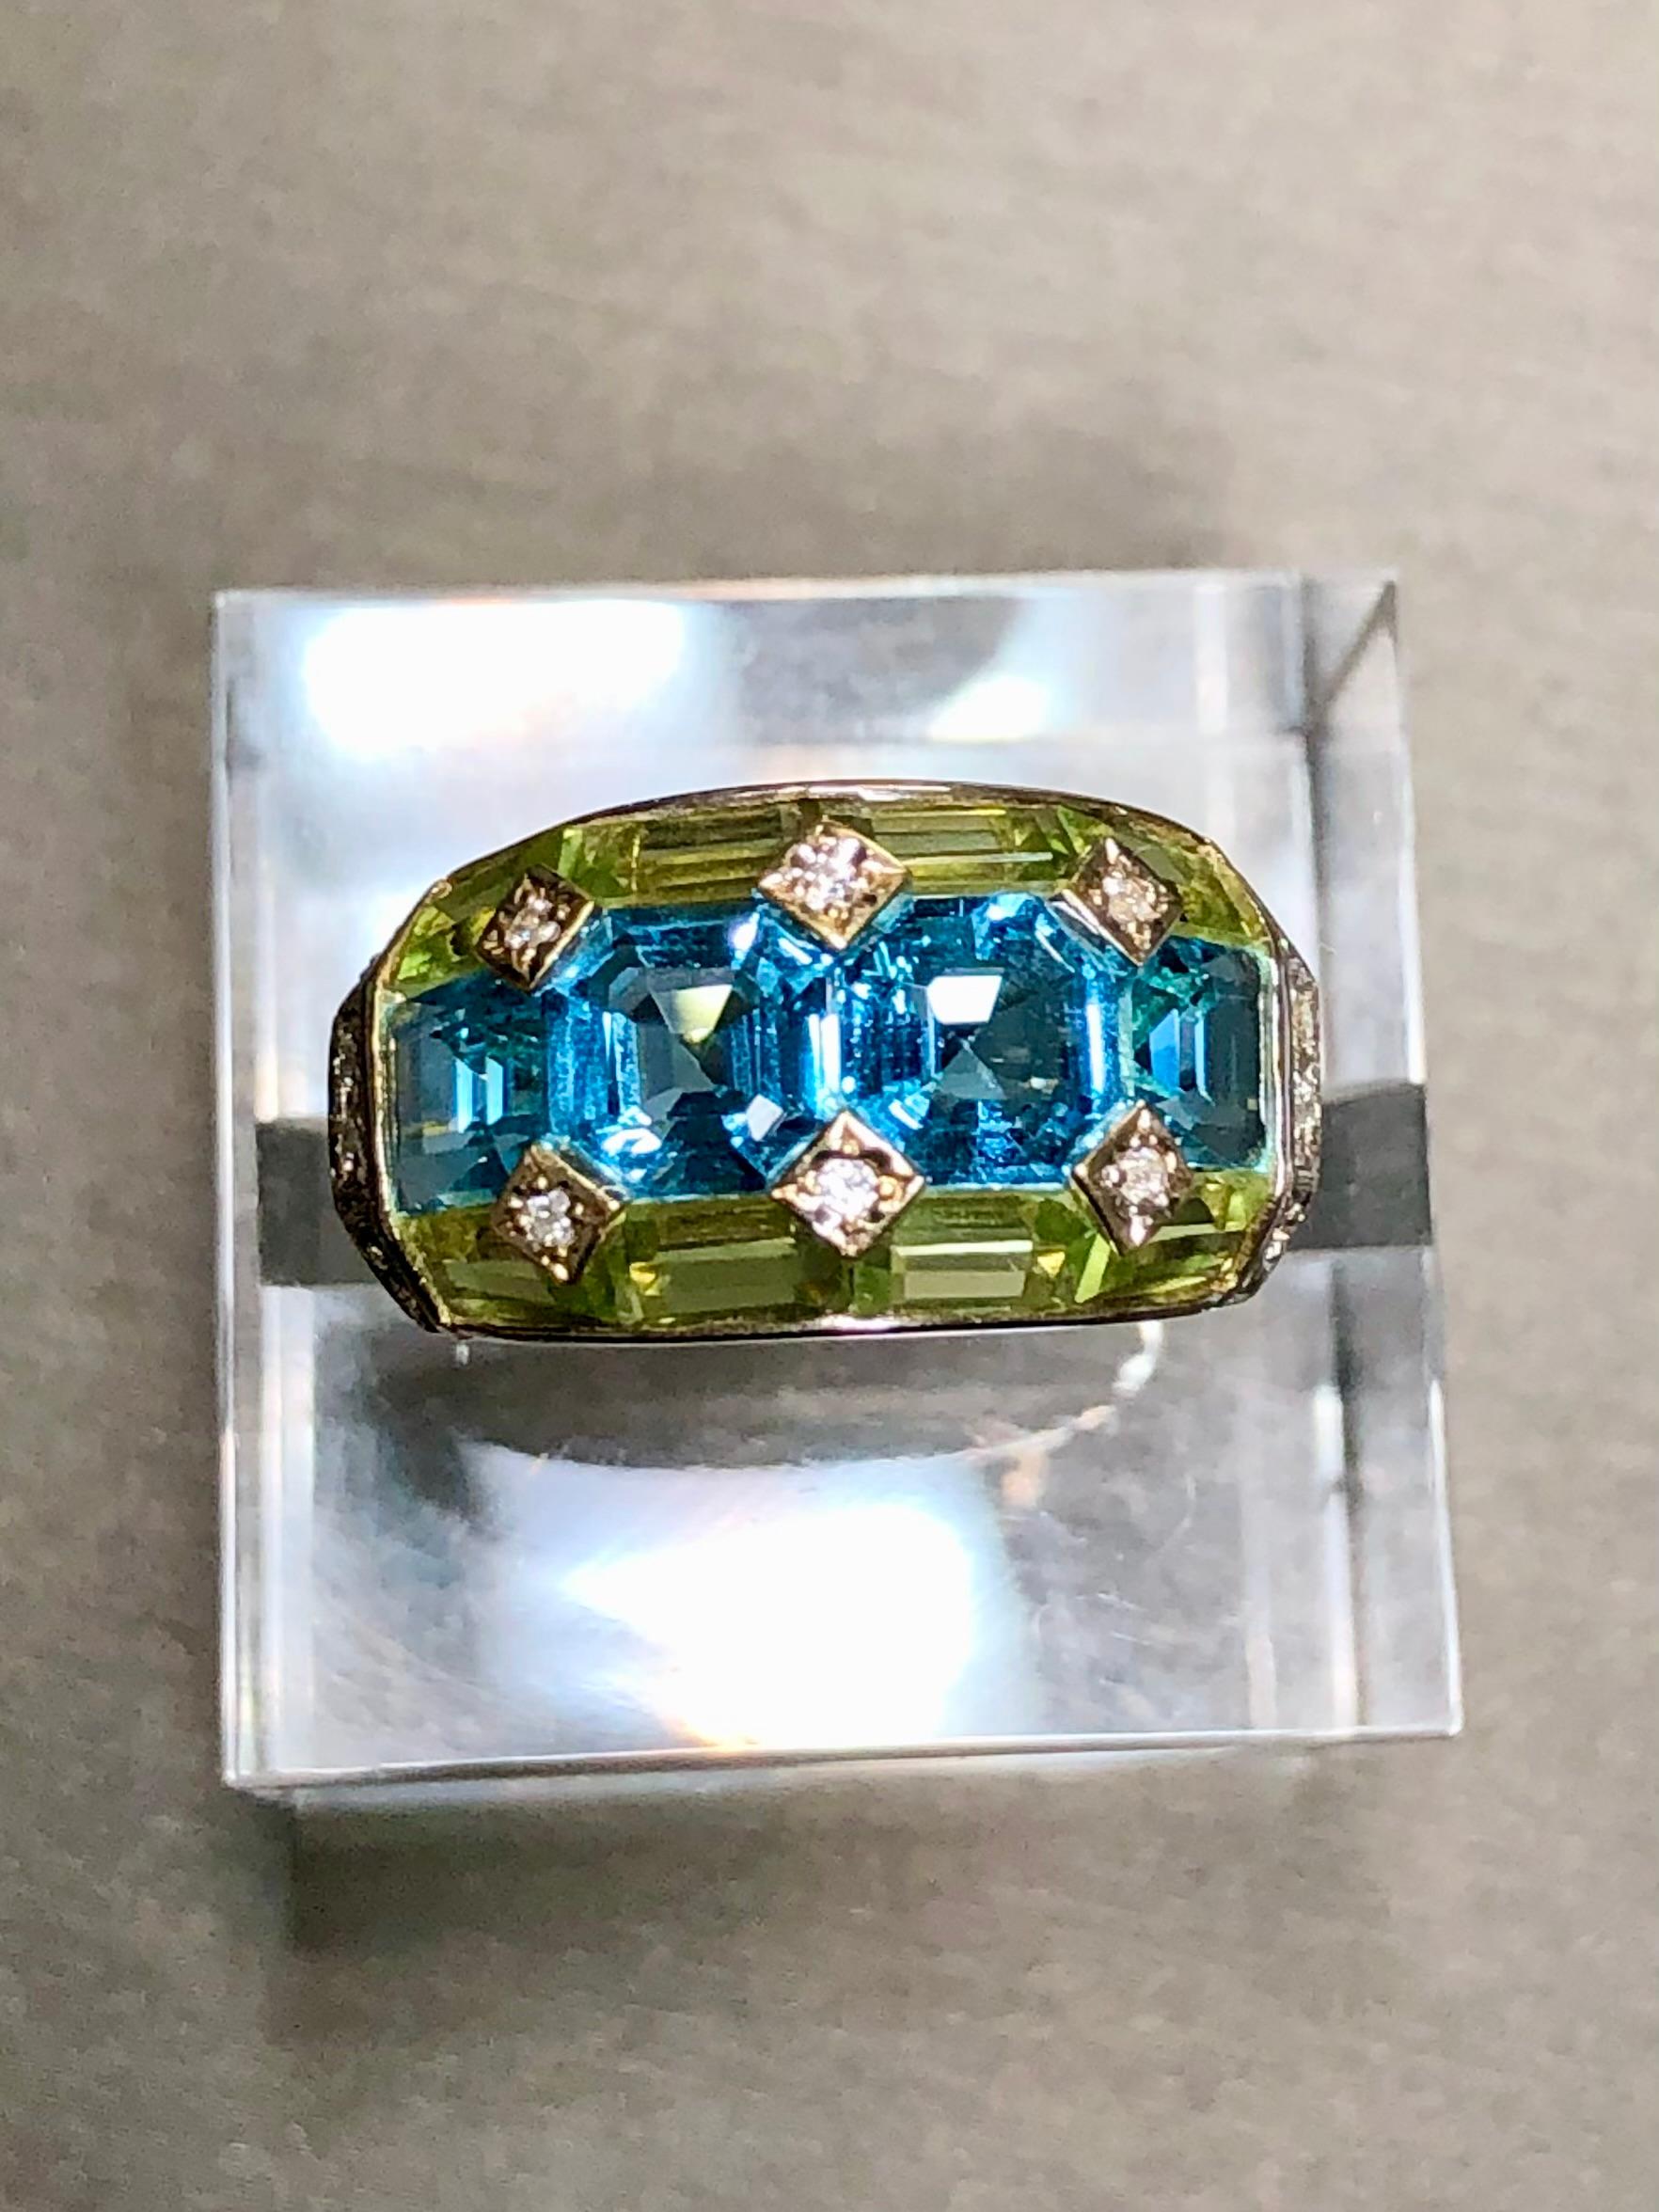 A beautifully made ring done in 18K yellow gold that has been set with 3.35cttw in blue topaz, 2.46cttw, 2.46cttw in green peridot and .09cttw in H-I color Si1-2 clarity diamonds… such a color combination! All weights are stamped inside of the